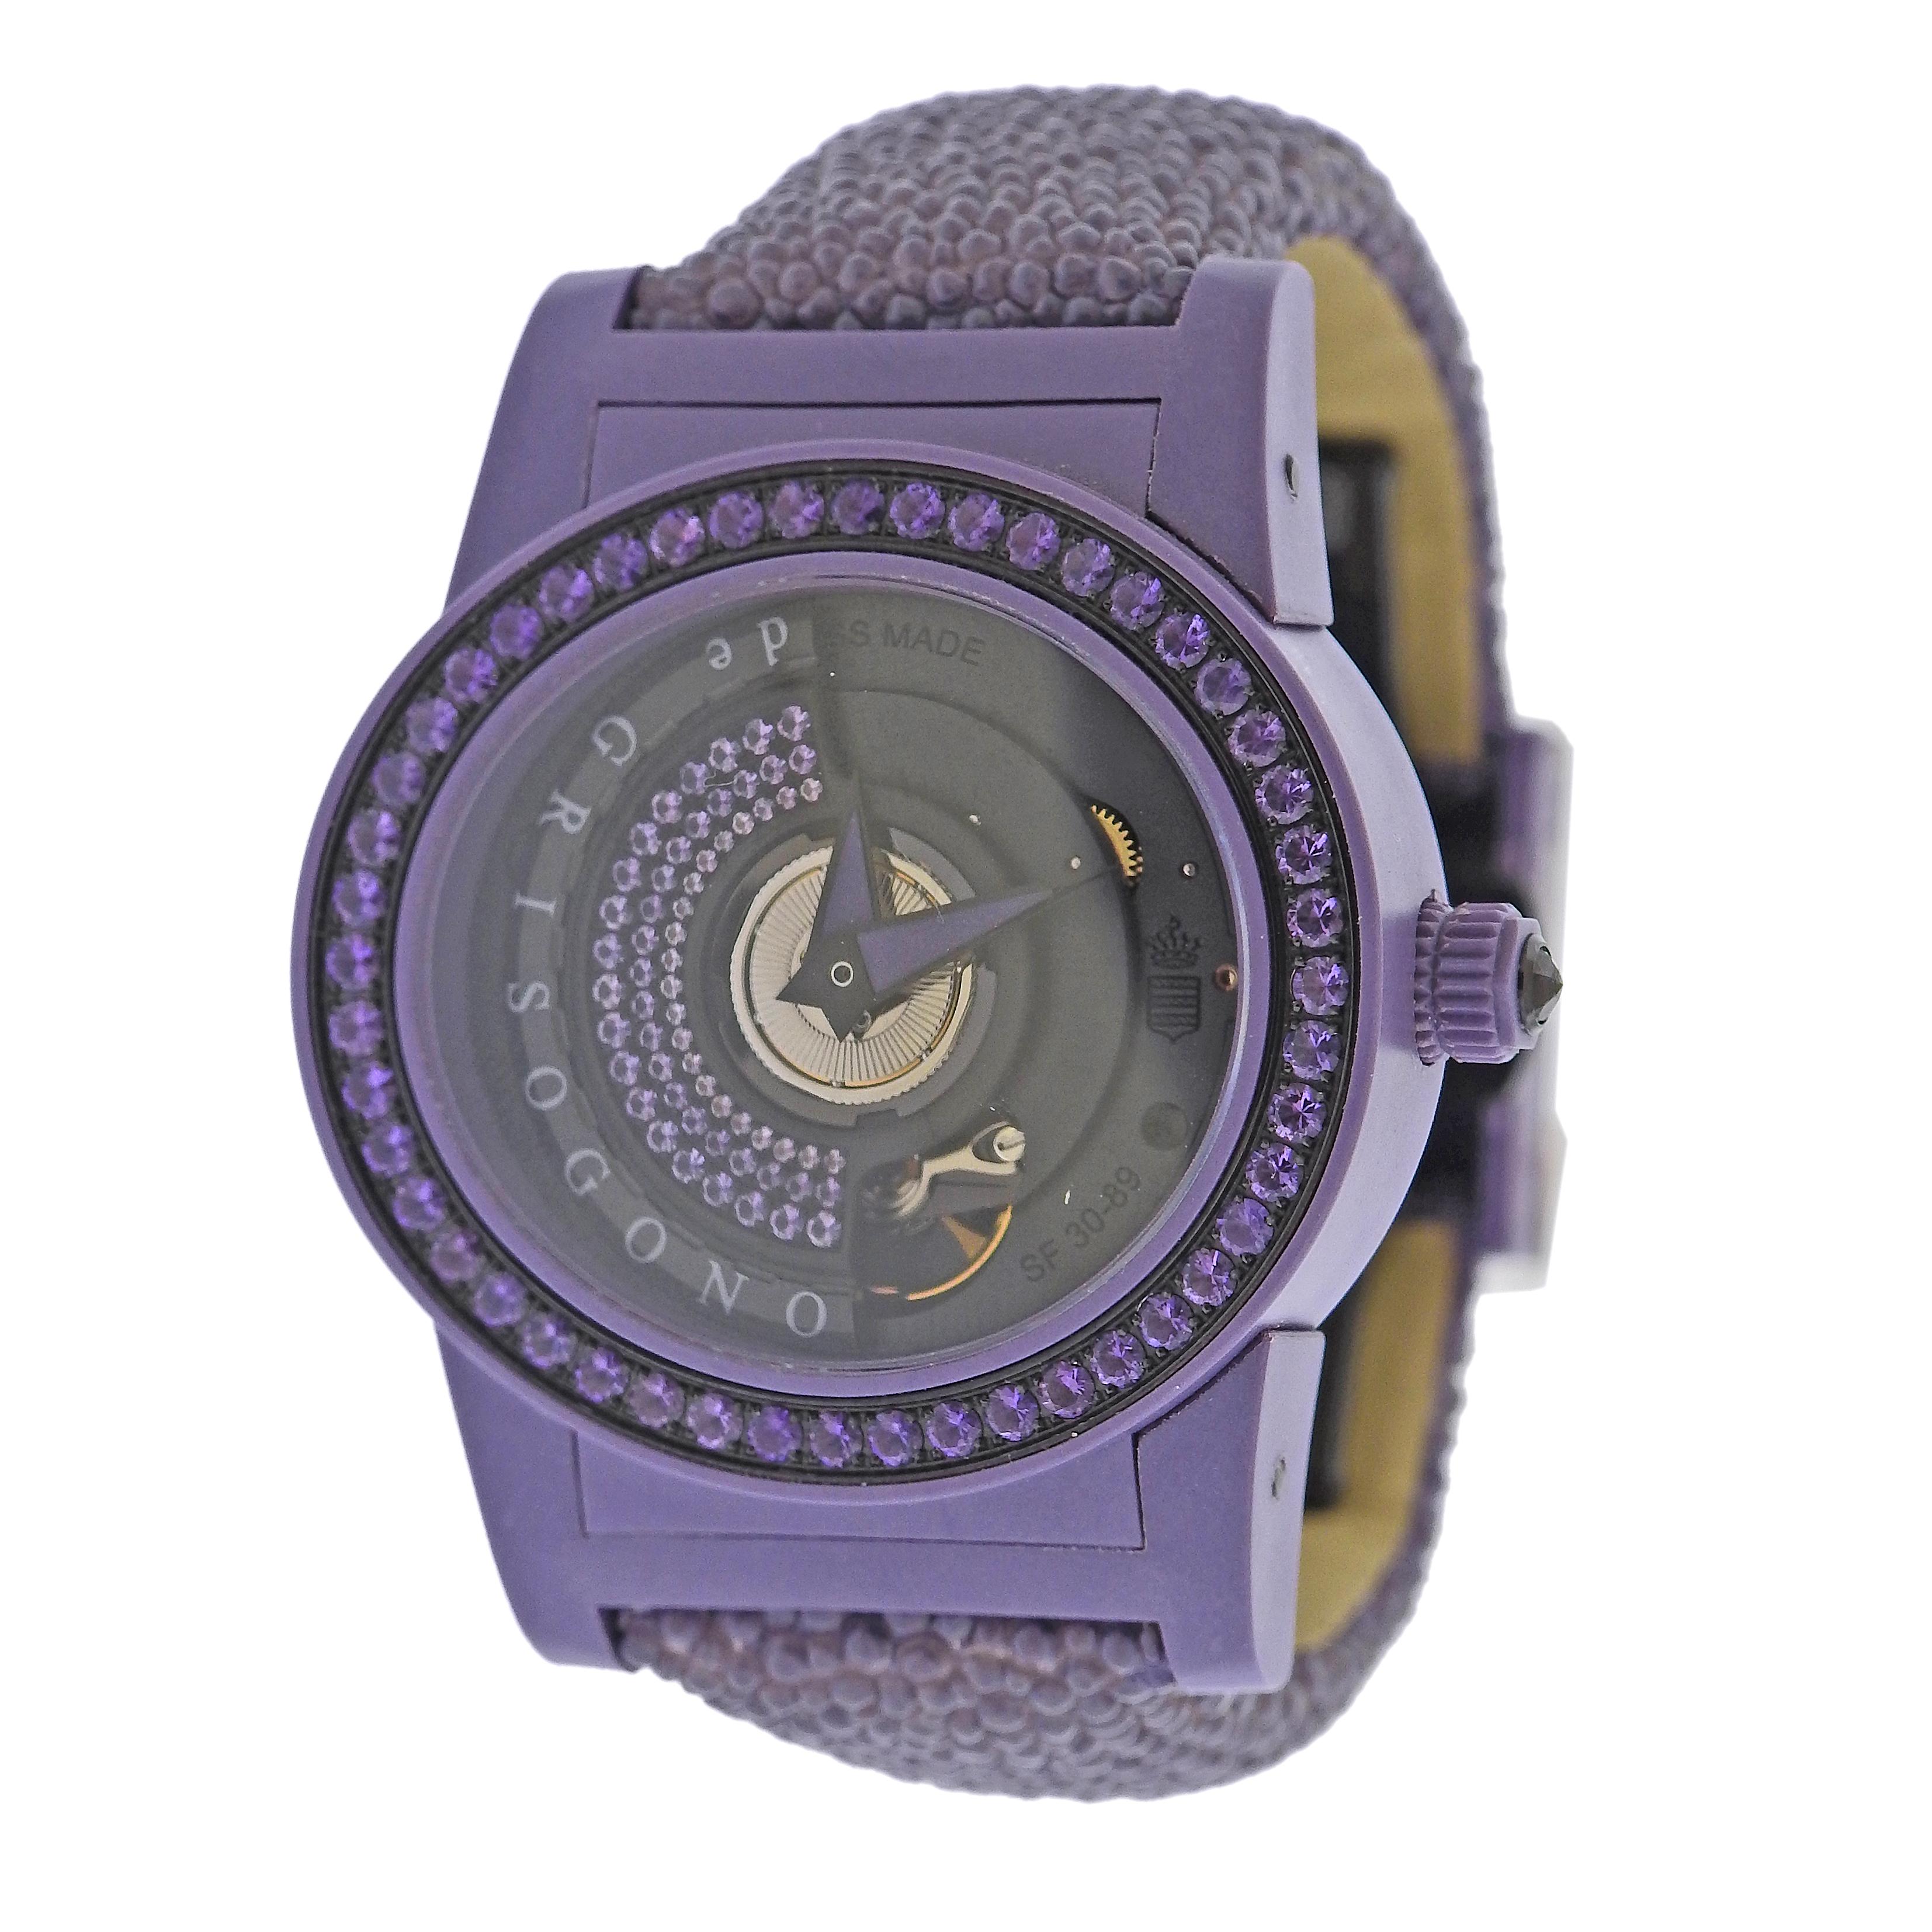 New with tag de Grisogono Tondo by Night watch, featuring violet purple fiberglass case, violet galuchat leather bracelet and deployant buckle. Case decorated with amethysts. Automatic movement. Comes with box and papers. Case - 38mm excl. crown x